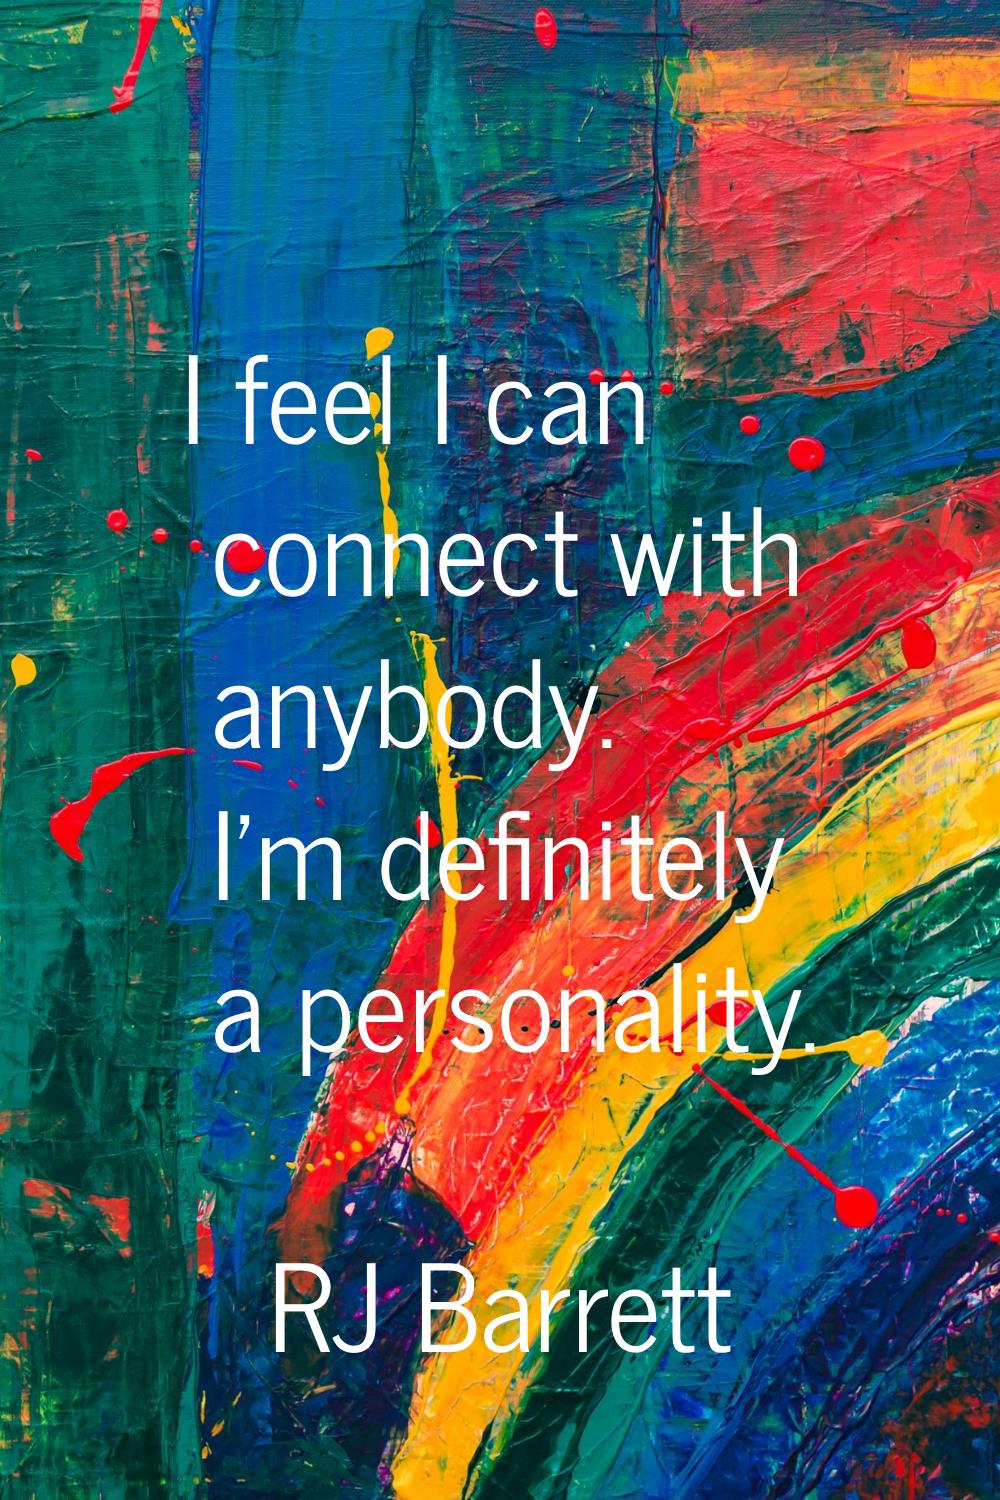 I feel I can connect with anybody. I'm definitely a personality.